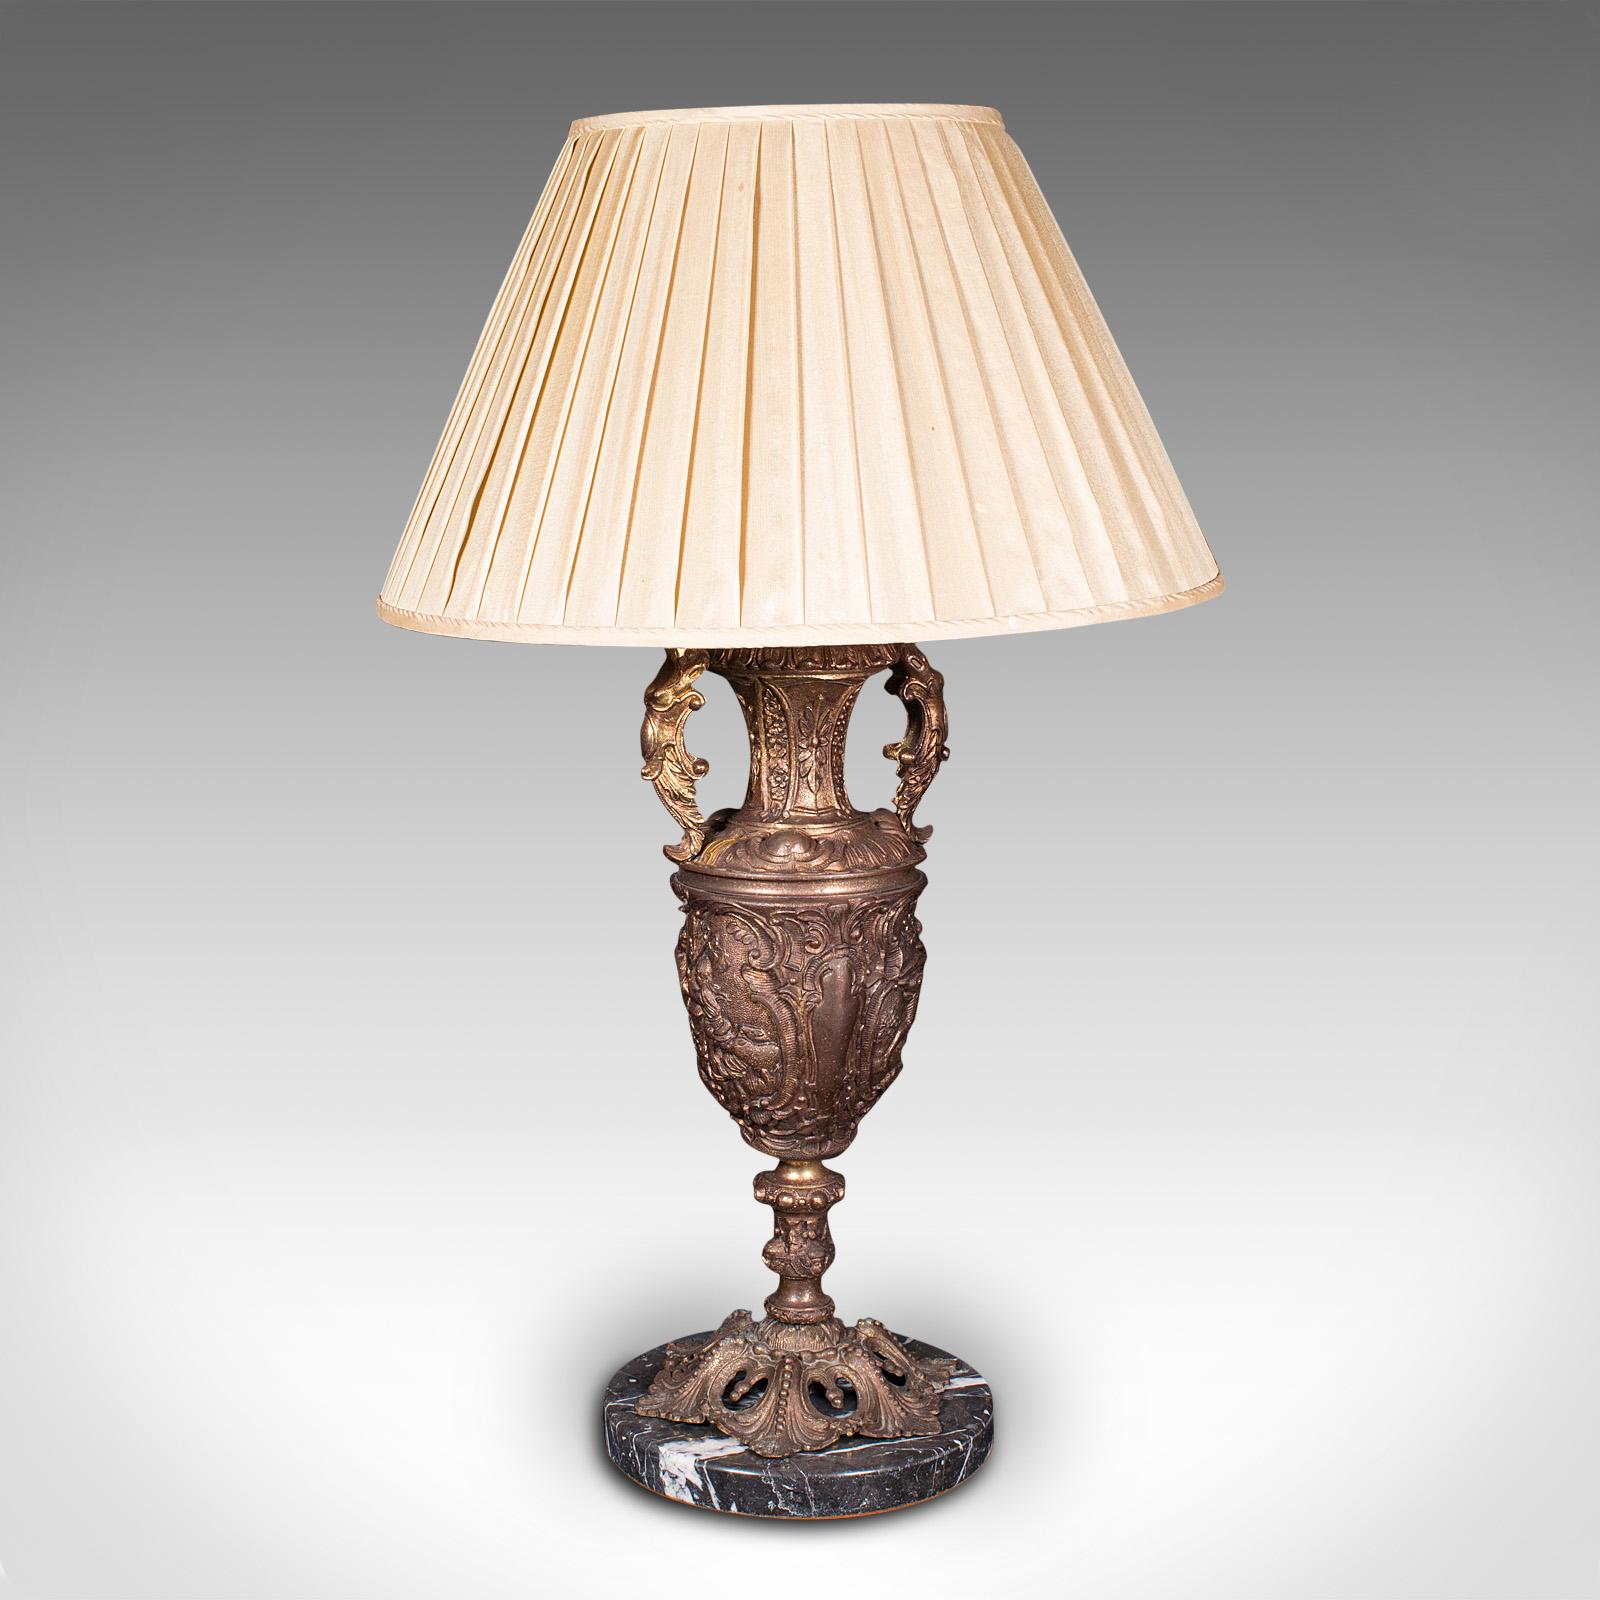 This is a large antique feature lamp. An Italian, gilt metal and marble heavy table light, dating to the late Victorian period, circa 1900.

Striking and substantial, with superb decorative appeal
Displaying a desirable aged patina and in good